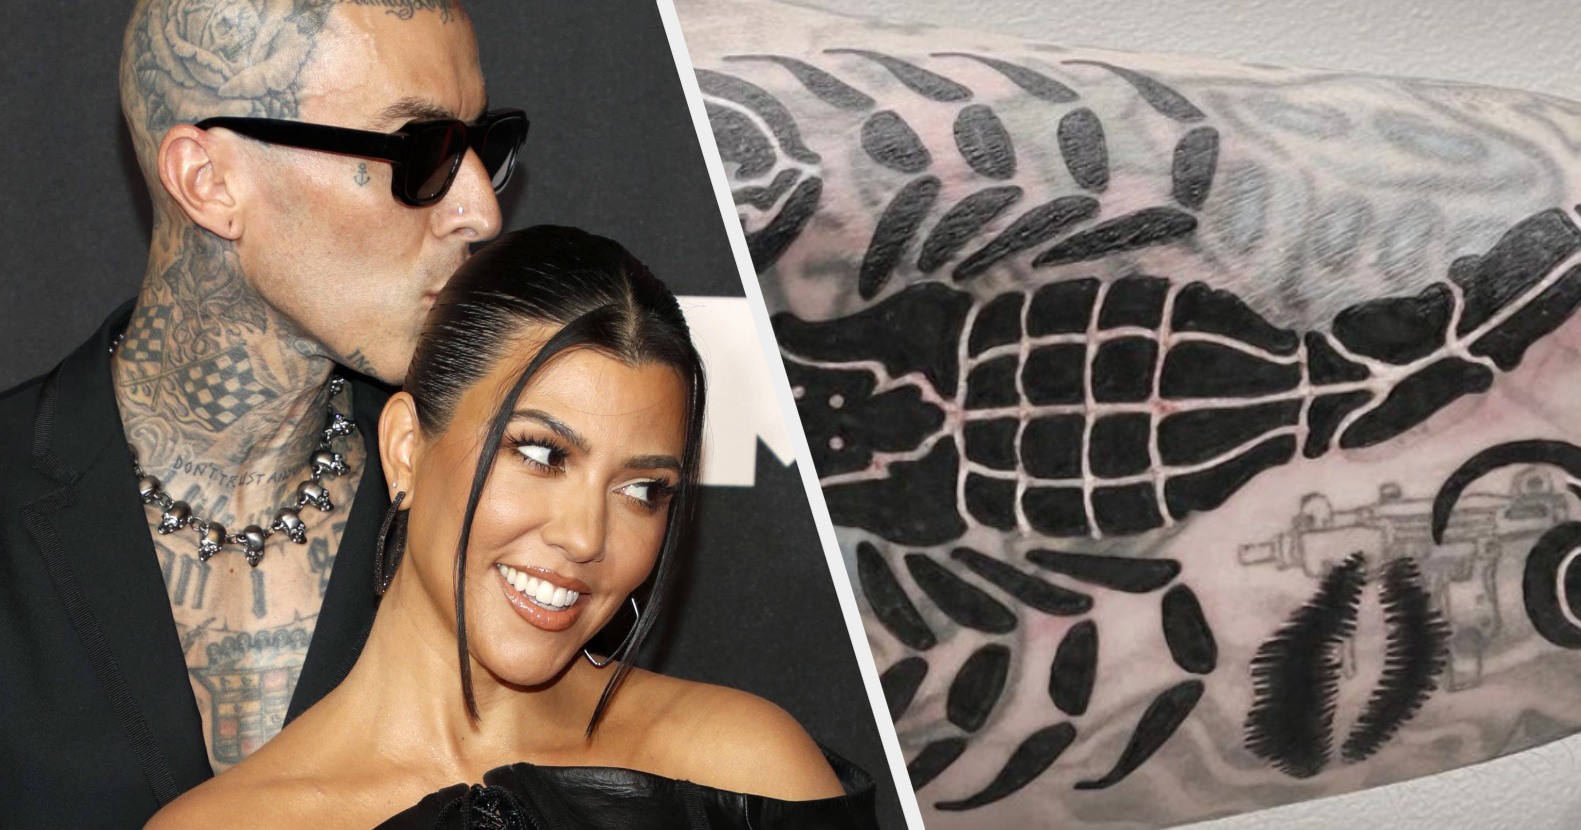 Travis Barker Covered Up His Ex's Name With A Tattoo Of Kourtney Kardashian's Lips After She Wiped All Recent Photos Of Their Kids